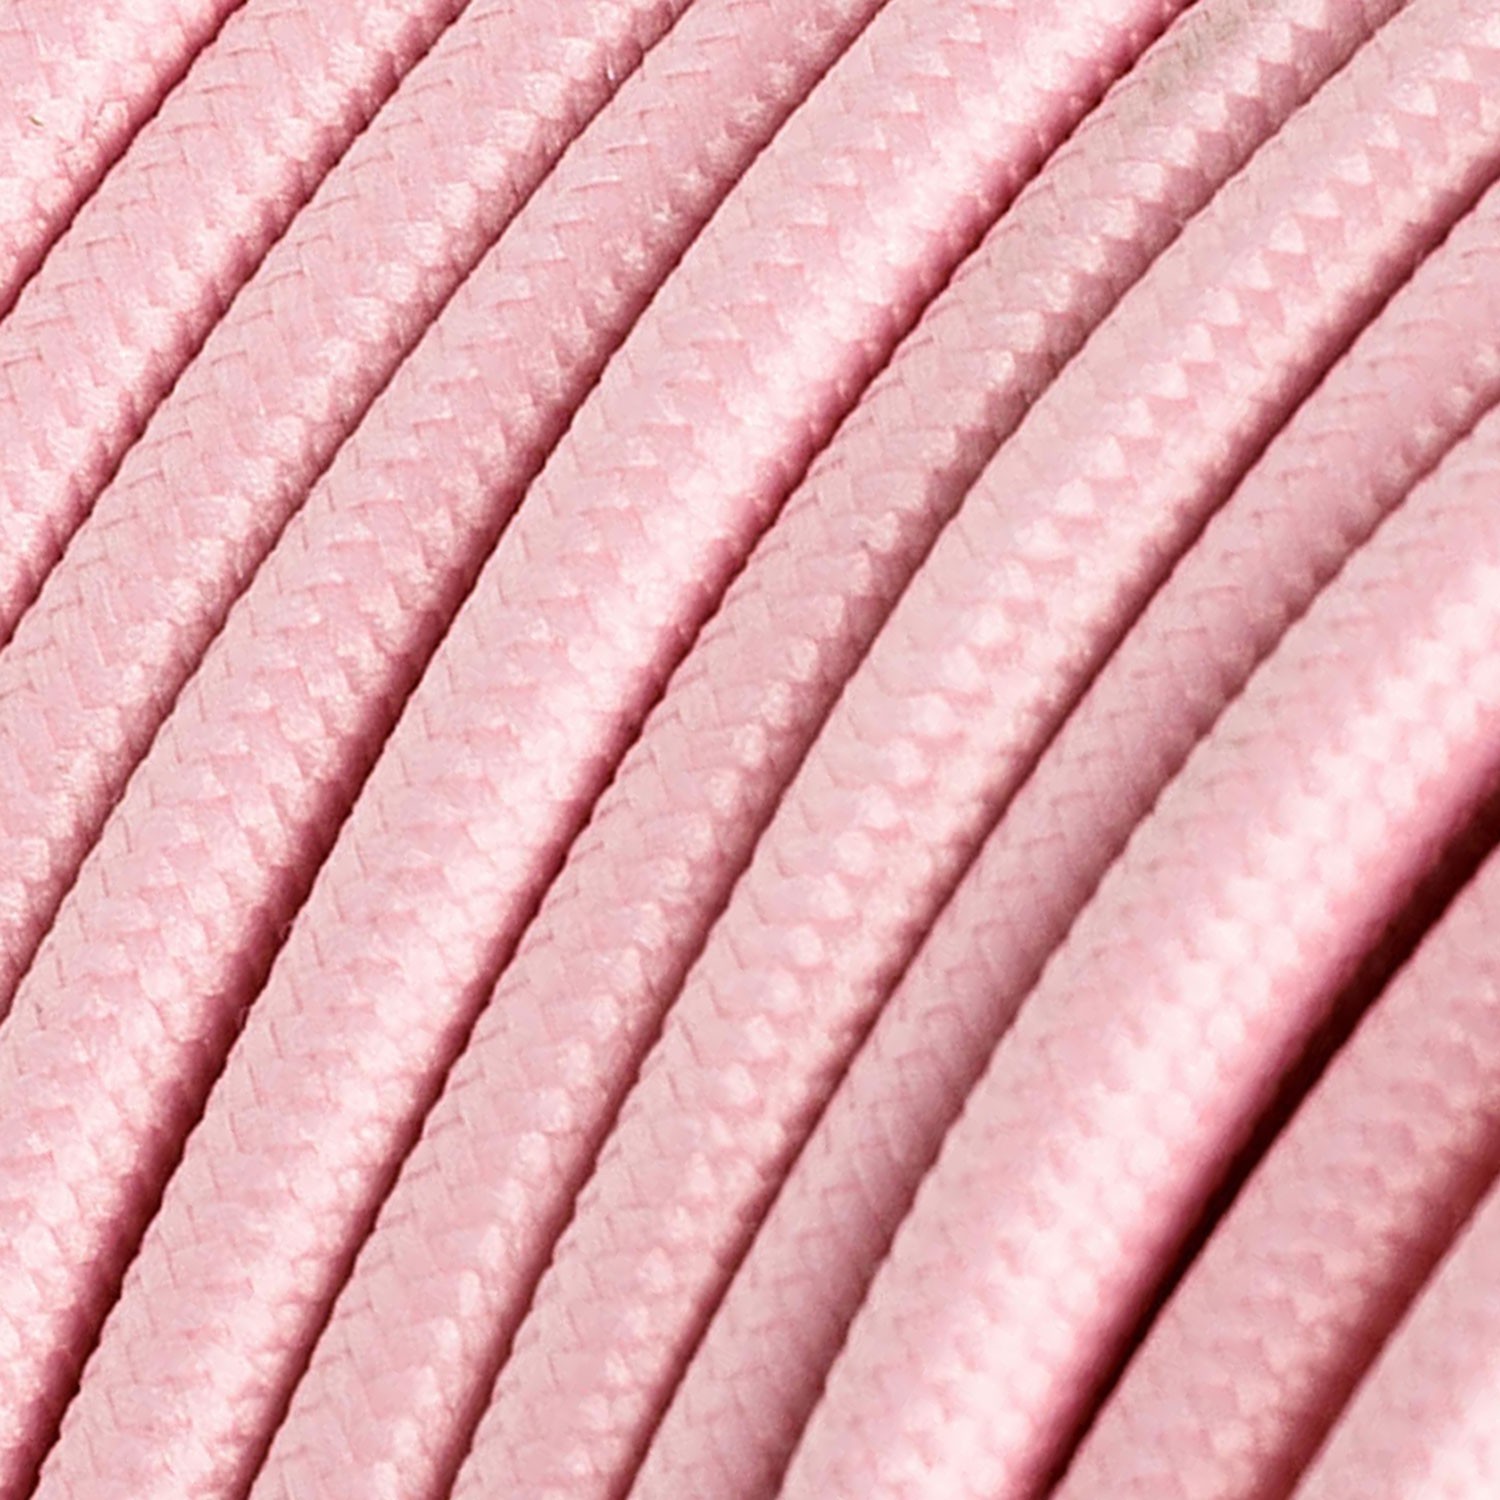 Round Electric Cable covered by Rayon solid color fabric RM16 Baby Pink